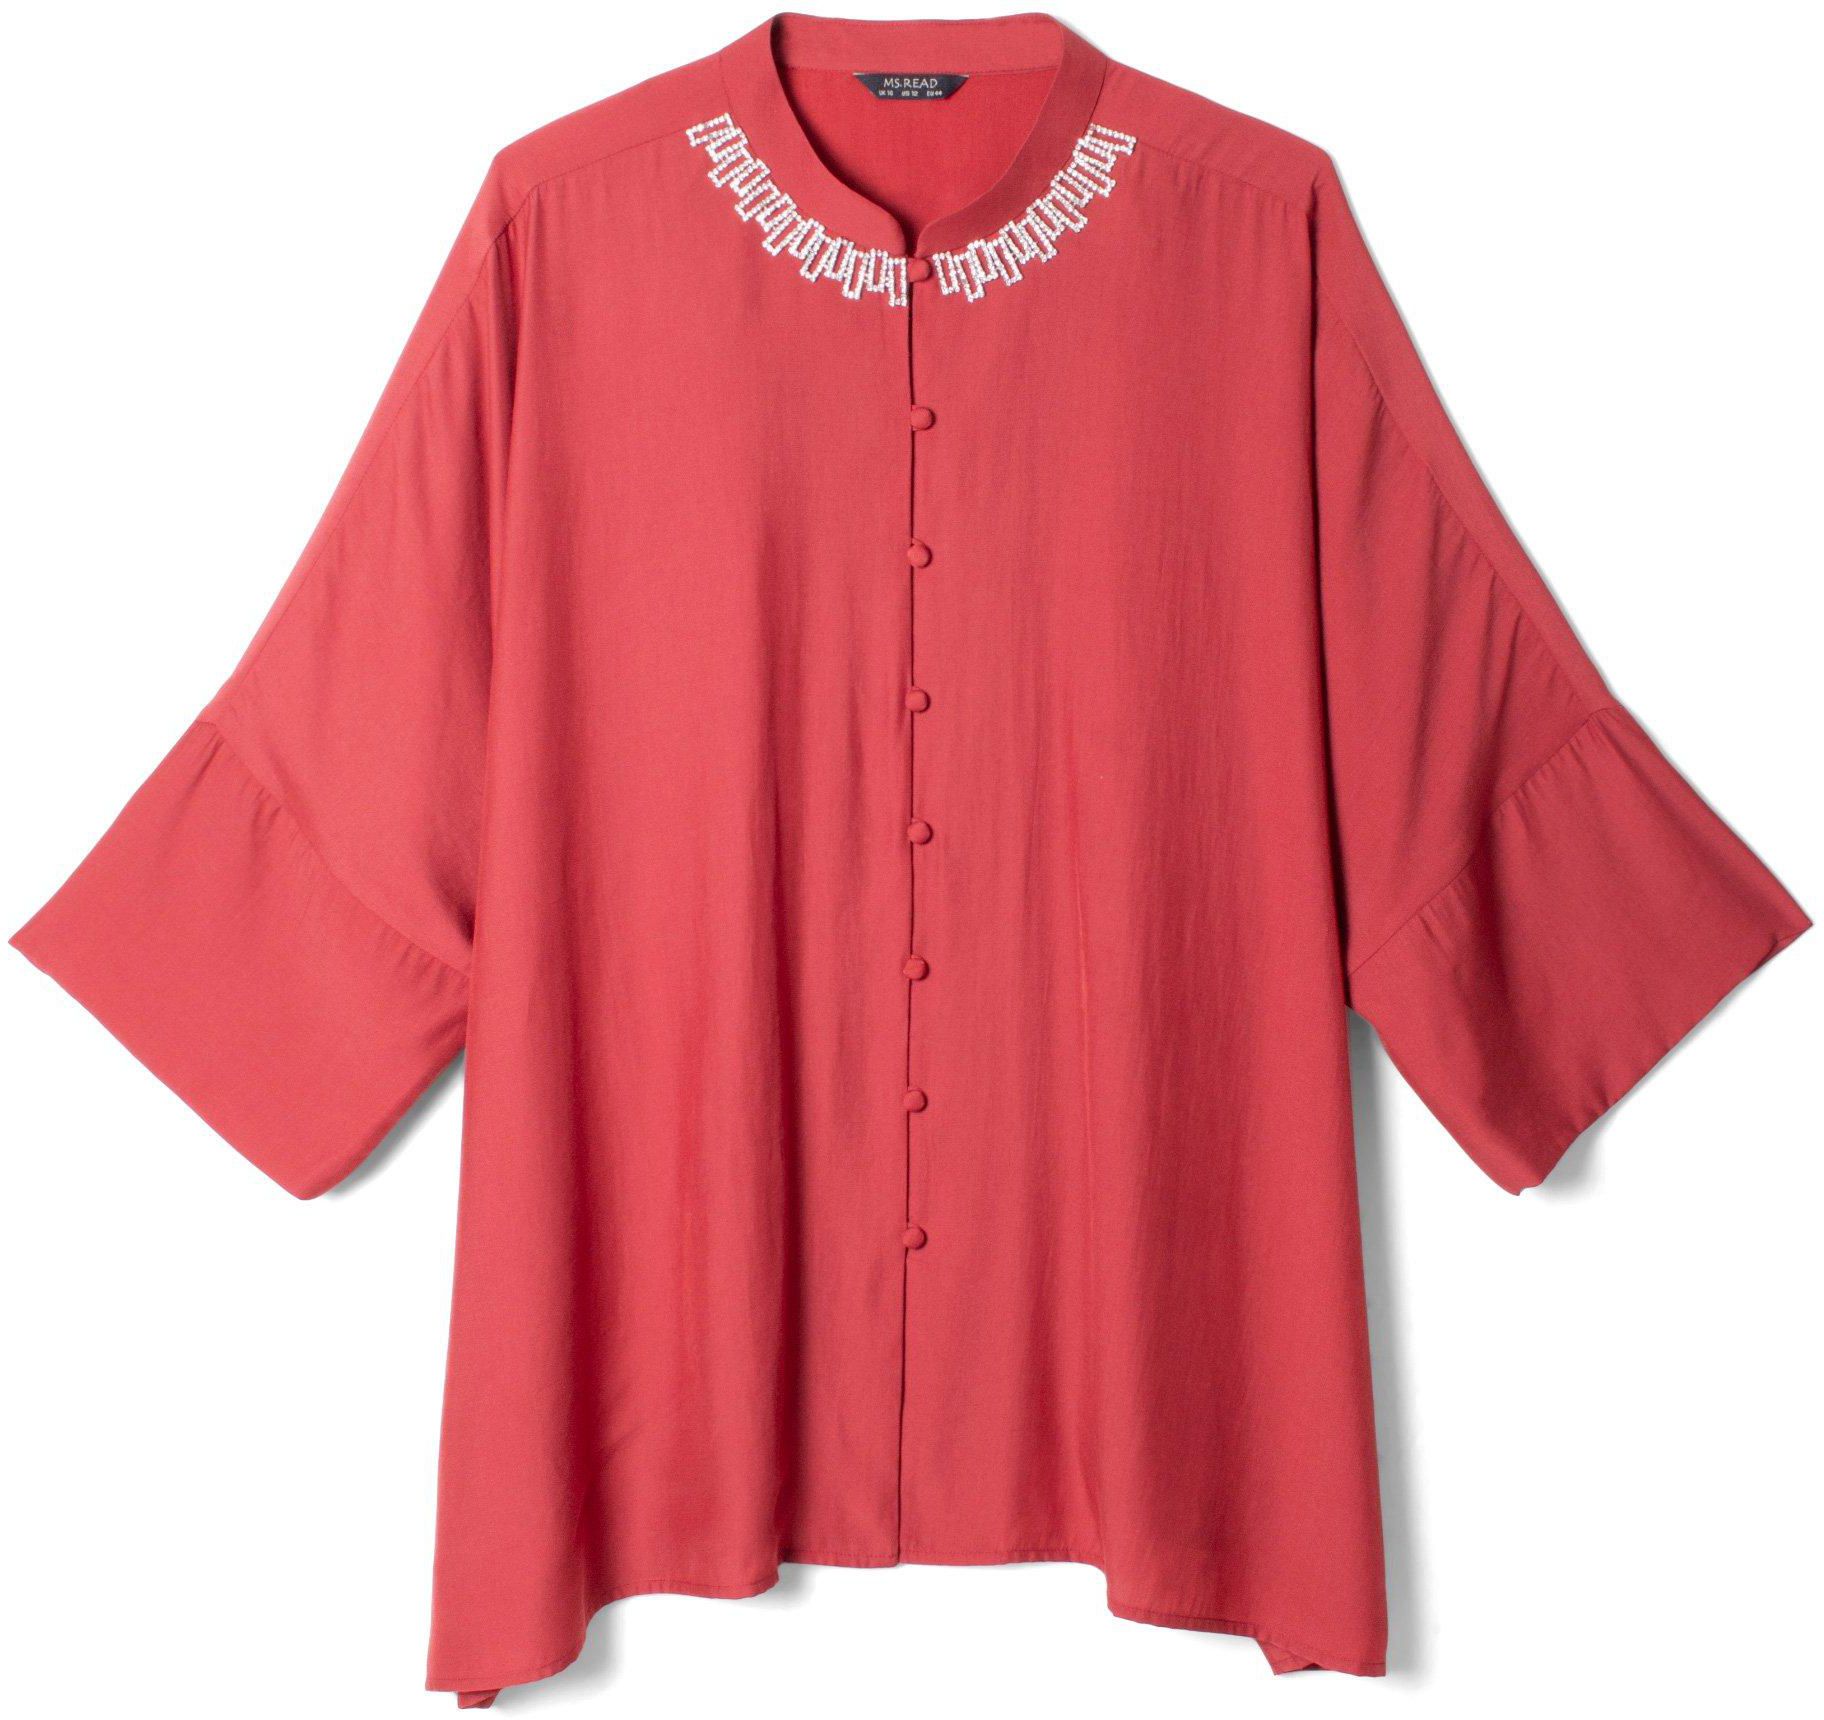 Embellished Kaftan Top Stand Collared Neck - 6 Sizes (Red)